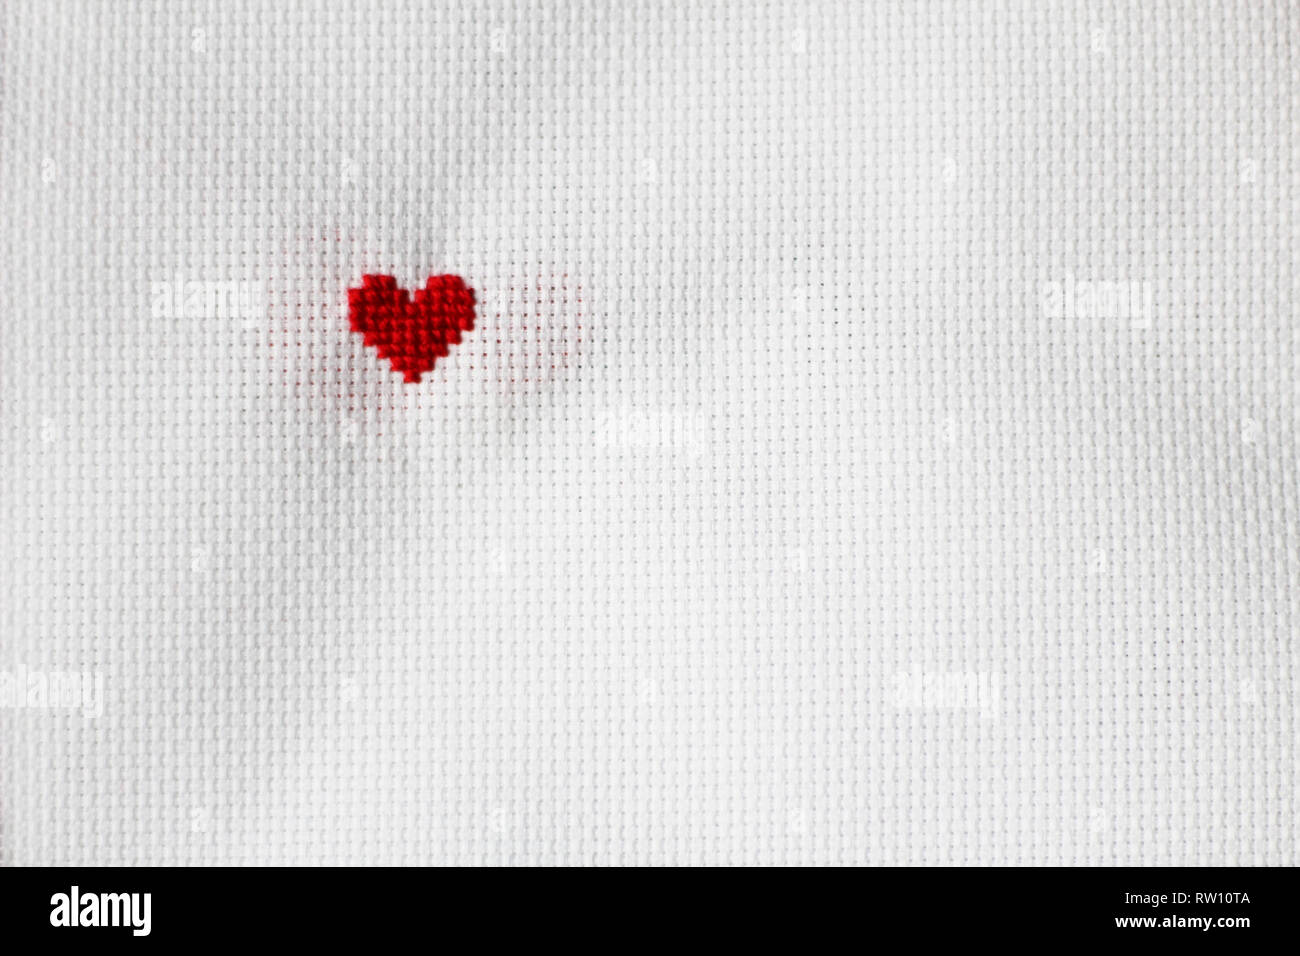 Cross stitched red heart, white background. free copy space Stock Photo